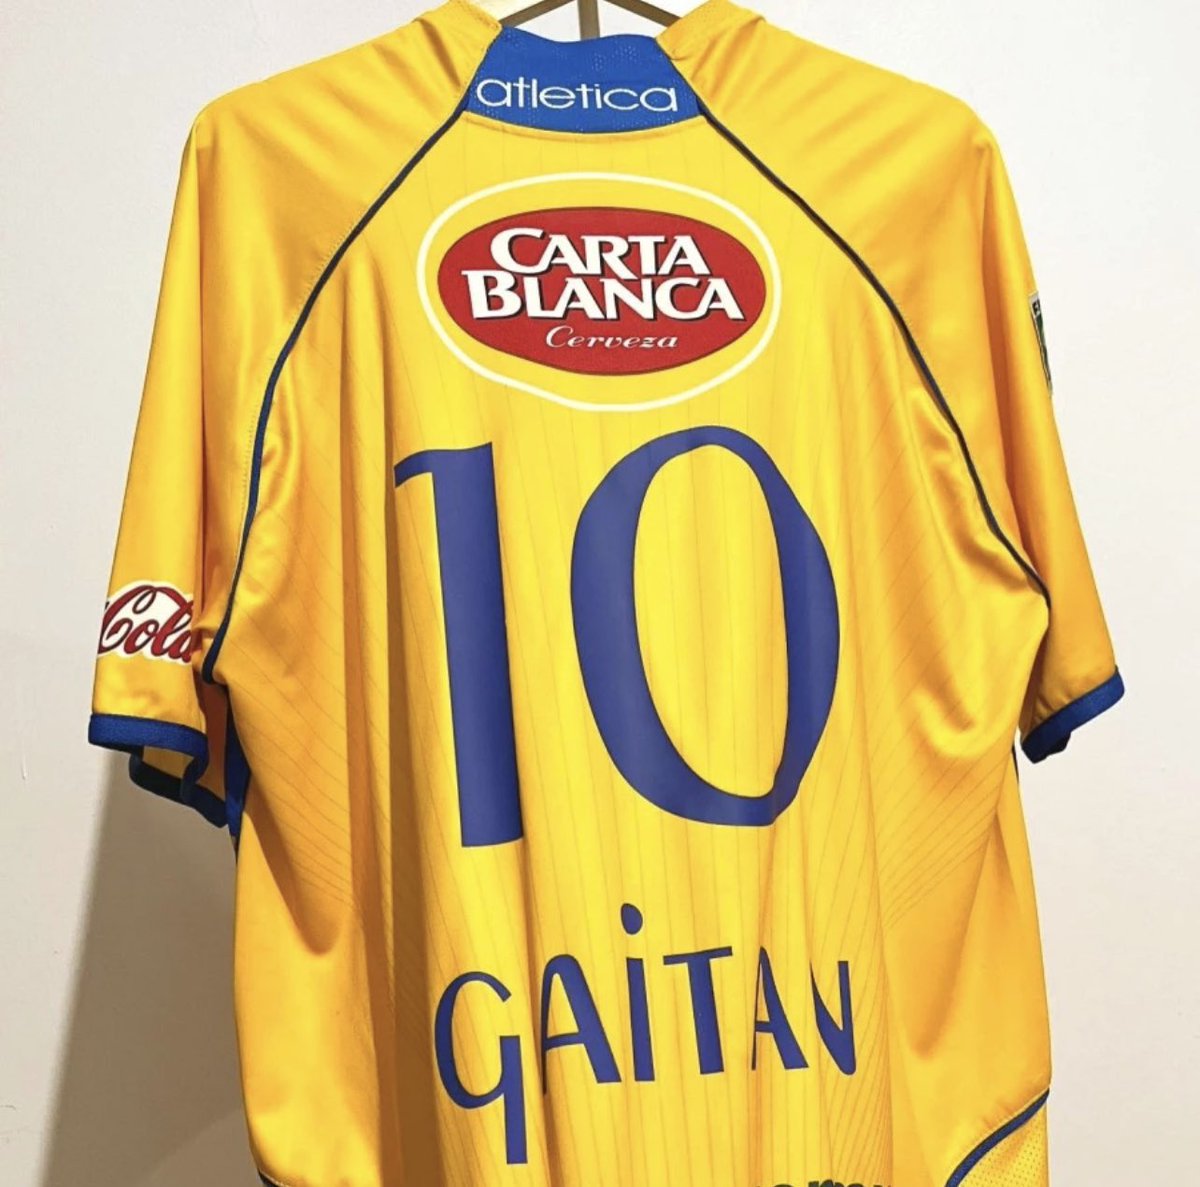 Bismillah,,,
🚨 CLEARANCE SALE‼️ 🚨
#Jersey4Sale #JerseyForSale
•
- TIGRES UANL 🇲🇽 | Home 2005/2006 | L (76 x 61) Cm | Excellent | GAITAN 10 | IDR 850.000 ❌ >> IDR 785.000 ✅
•
linktr.ee/SurrameyKits_
Marketplace by Request 👌
📩 WA : 082114488577
-
Thankyou Happy Shopping! 👊